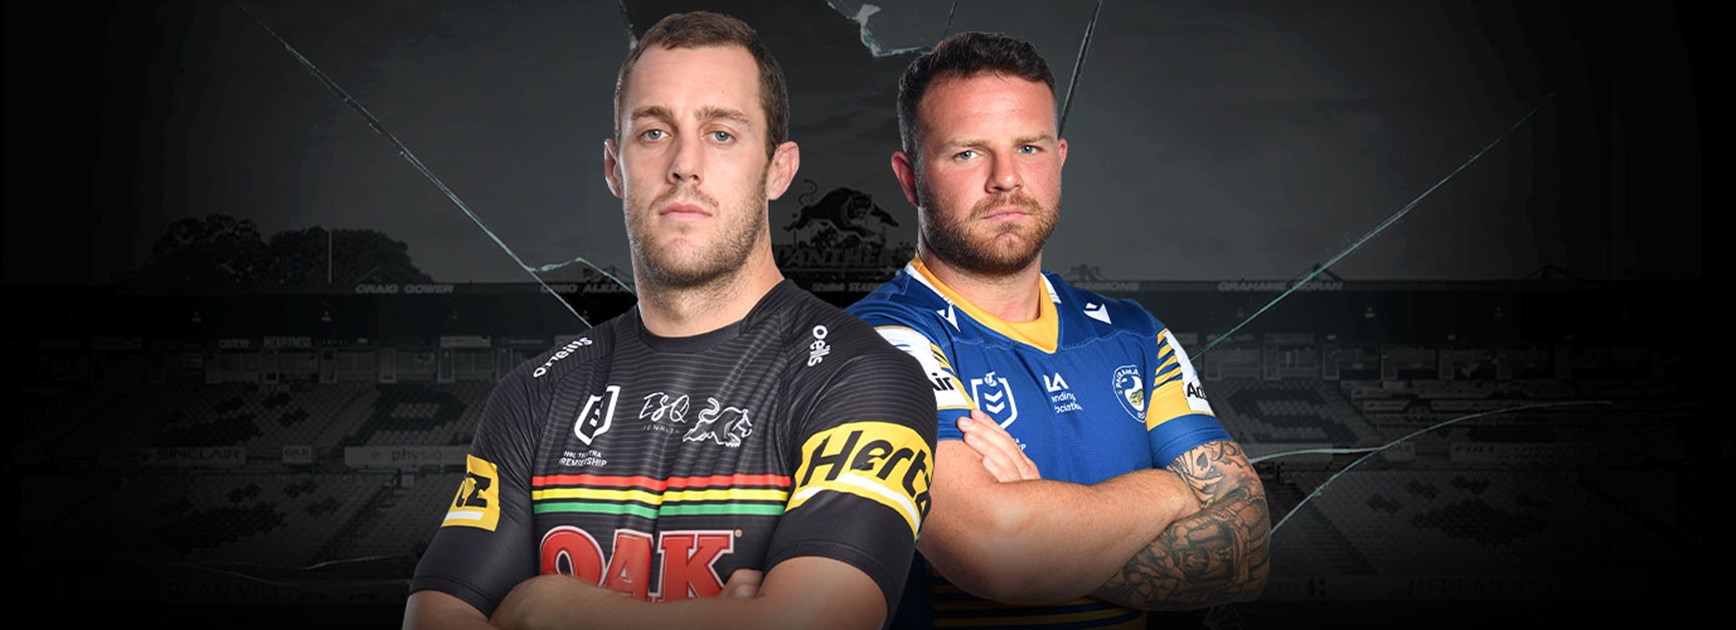 Event Update: Panthers v Eels